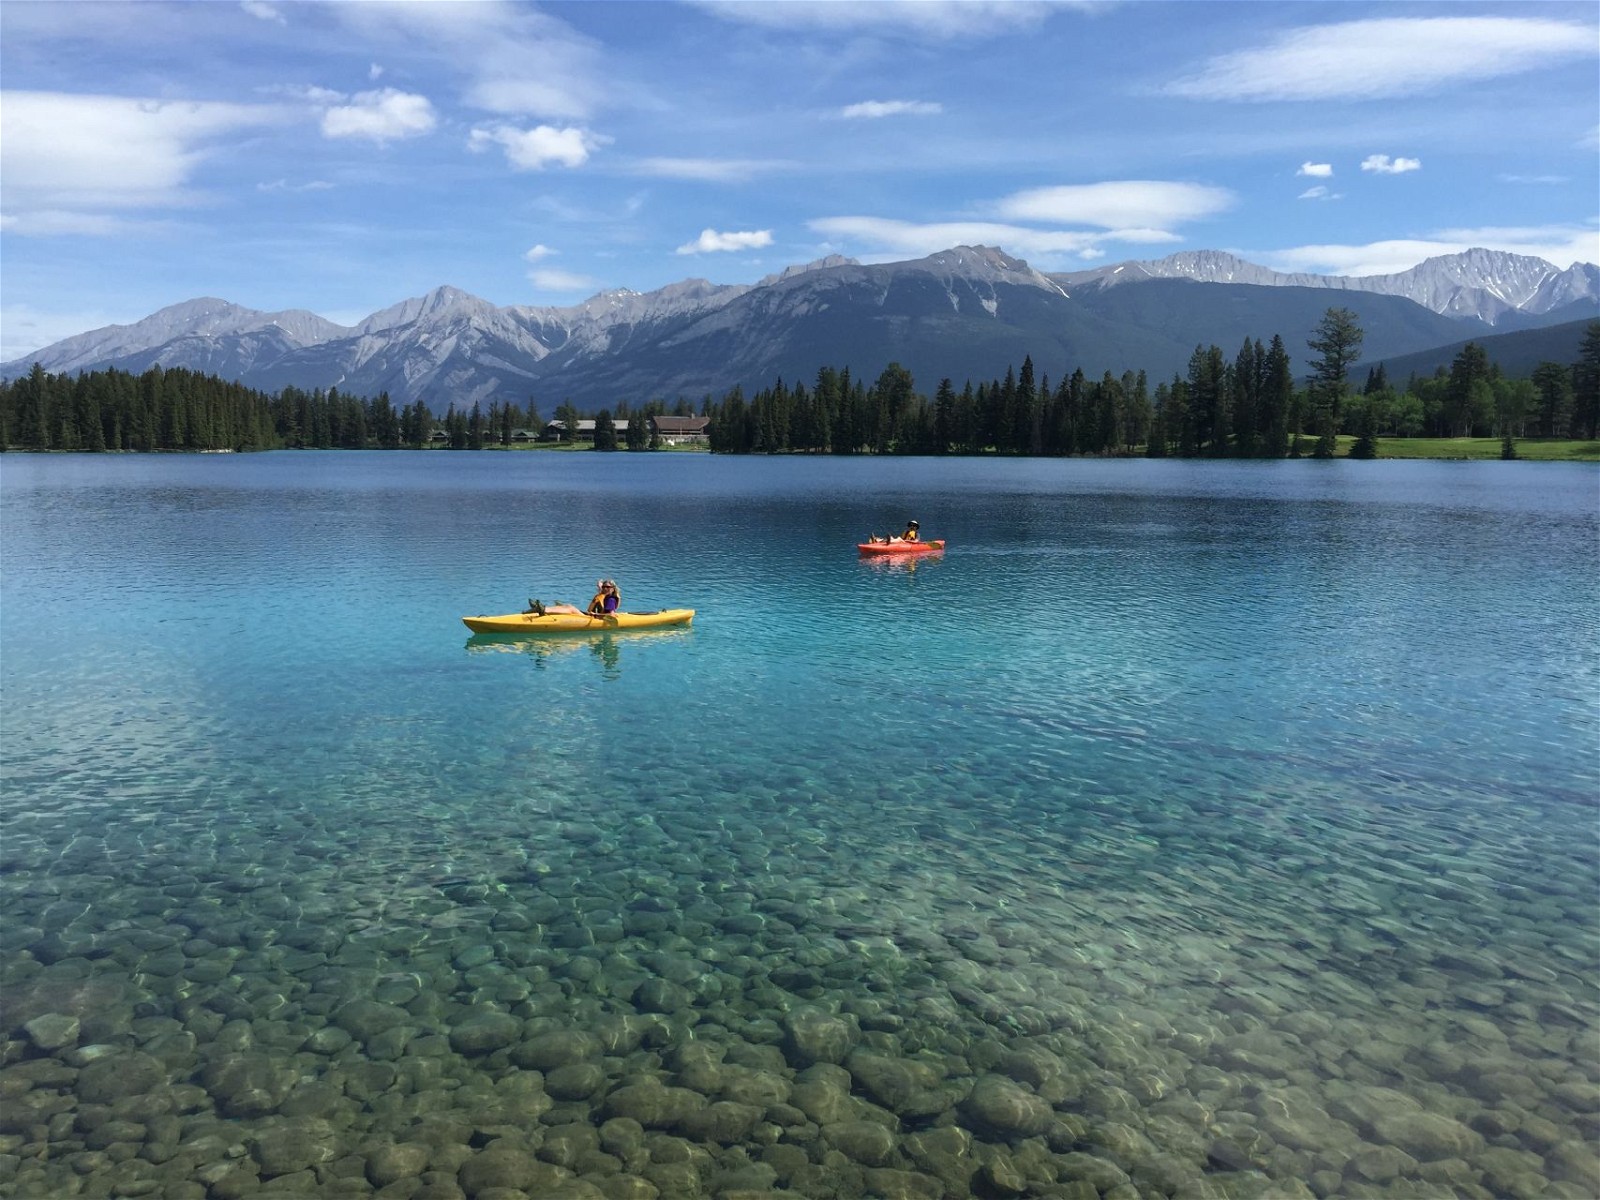 Jasper National Park is home to a number of breathtaking sights and activities